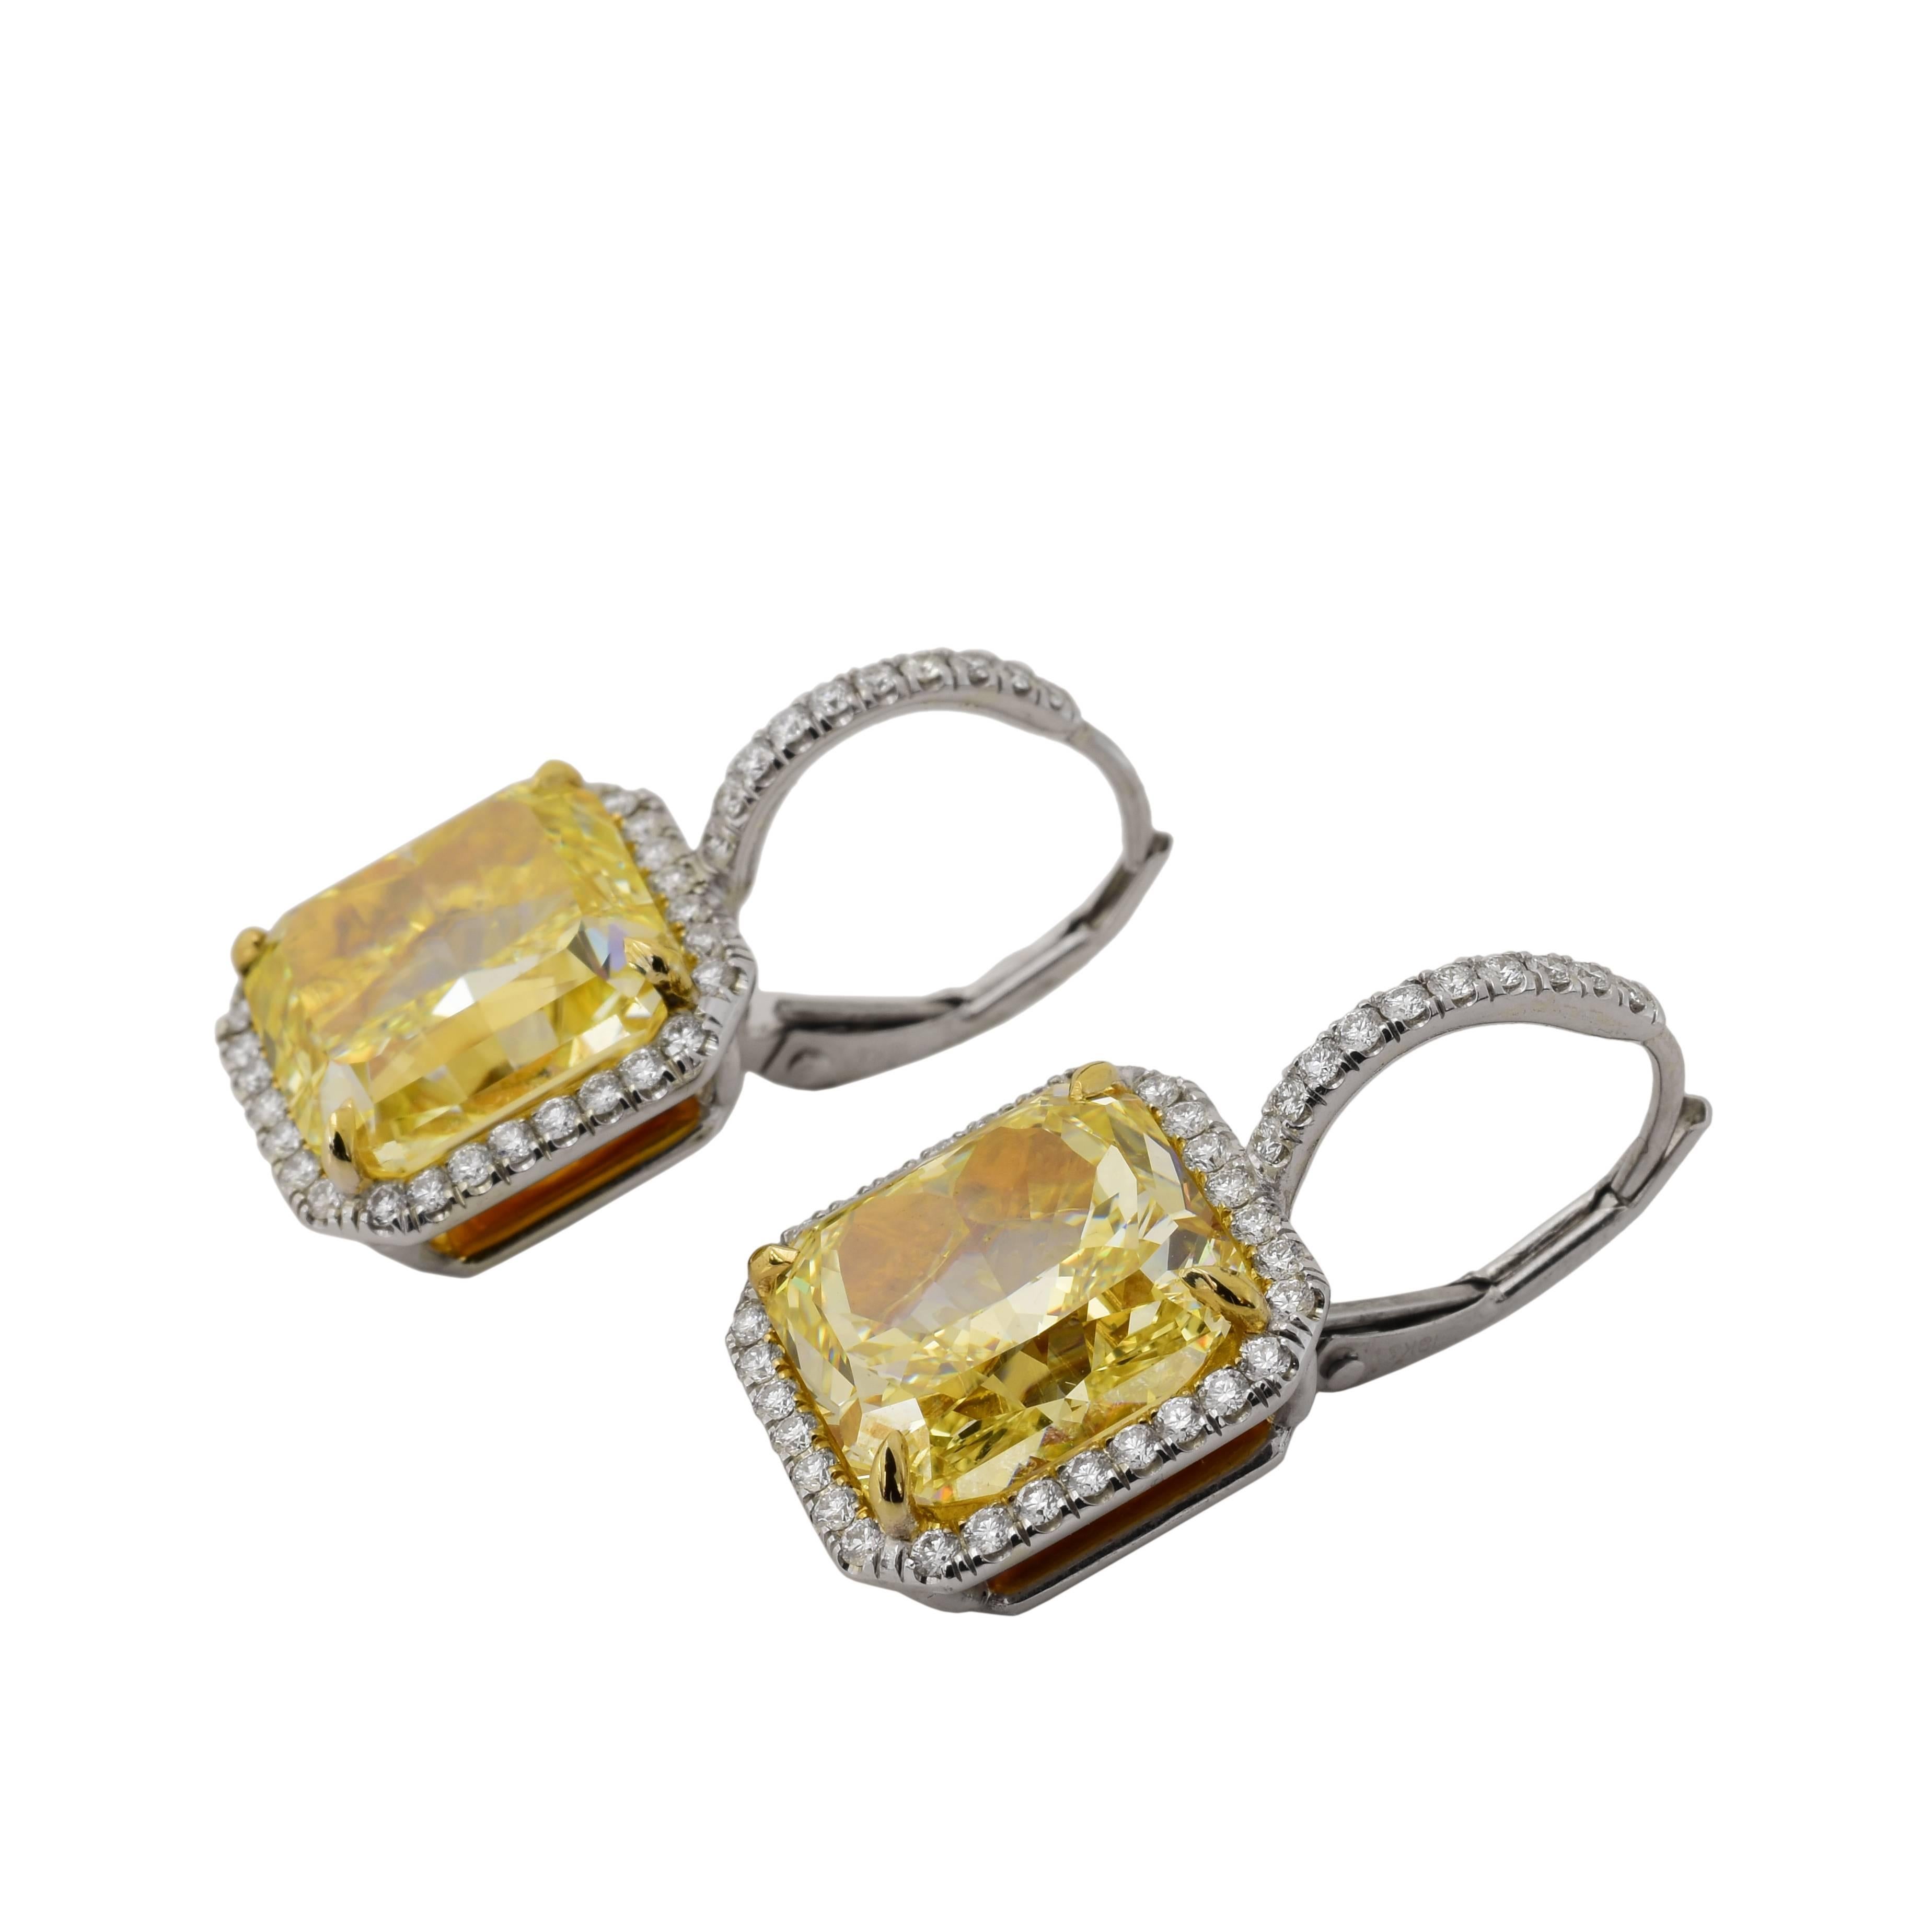 This pair of drop earrings, features a 6.64 carat GIA fancy yellow VS and a 6.02 carat GIA fancy yellow VS. Each center stone is surrounded by approximately .80 carats of white accent diamonds that continue up the design. The stones are set in white